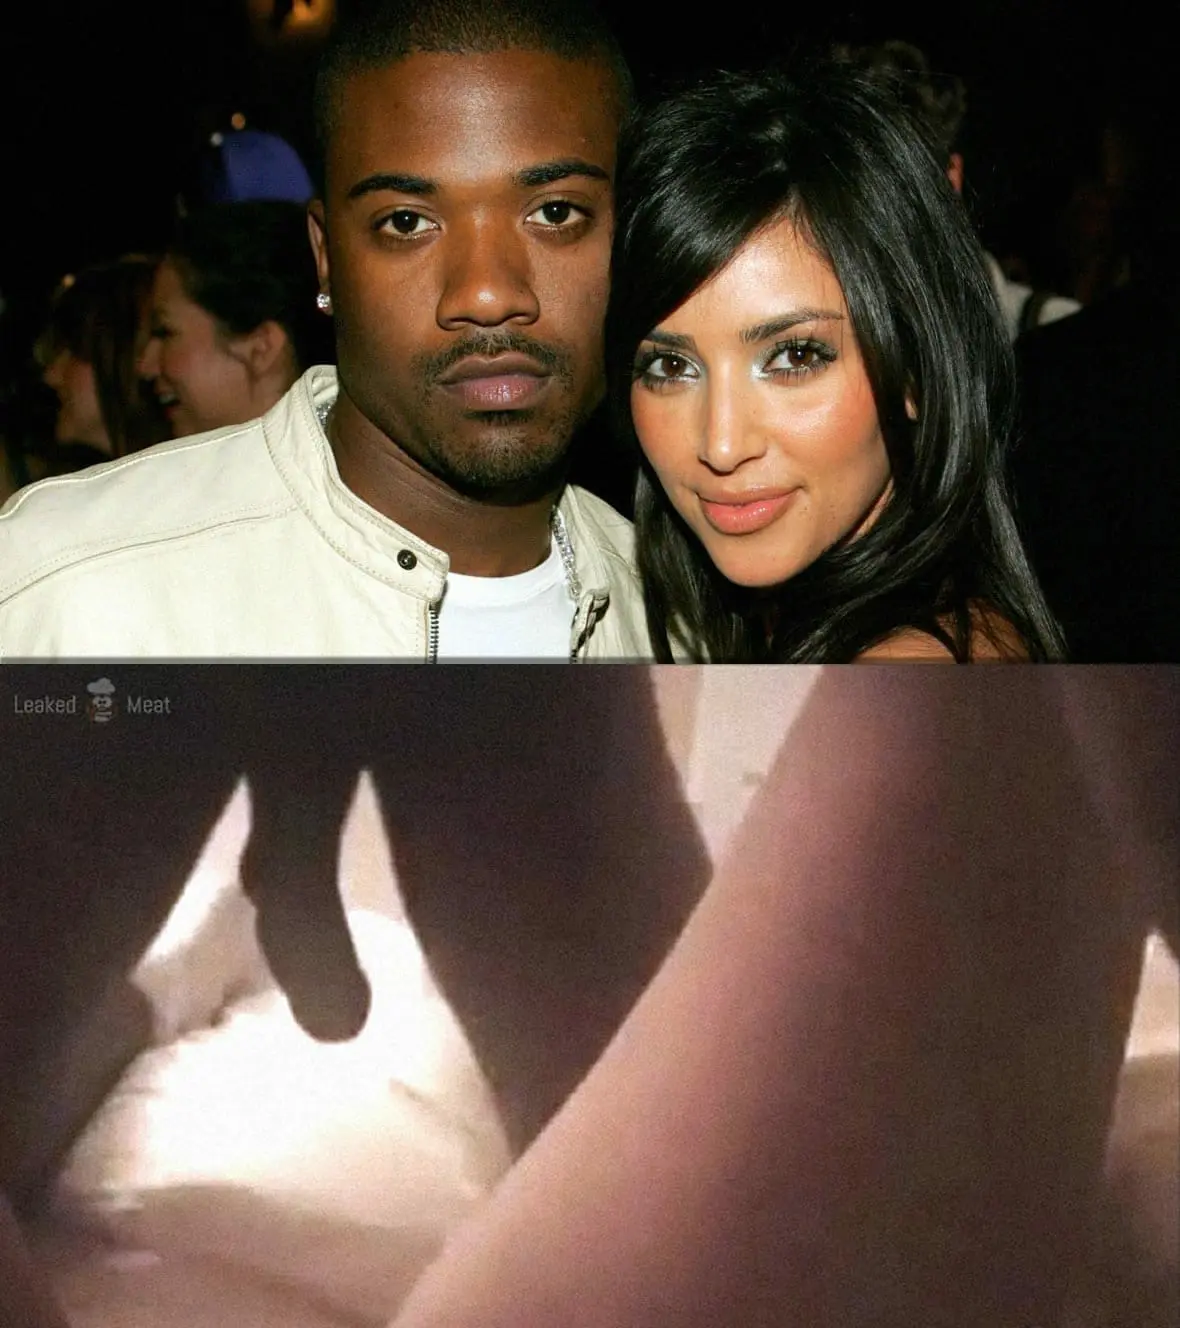 ashley bachmann recommends ray j naked pic pic